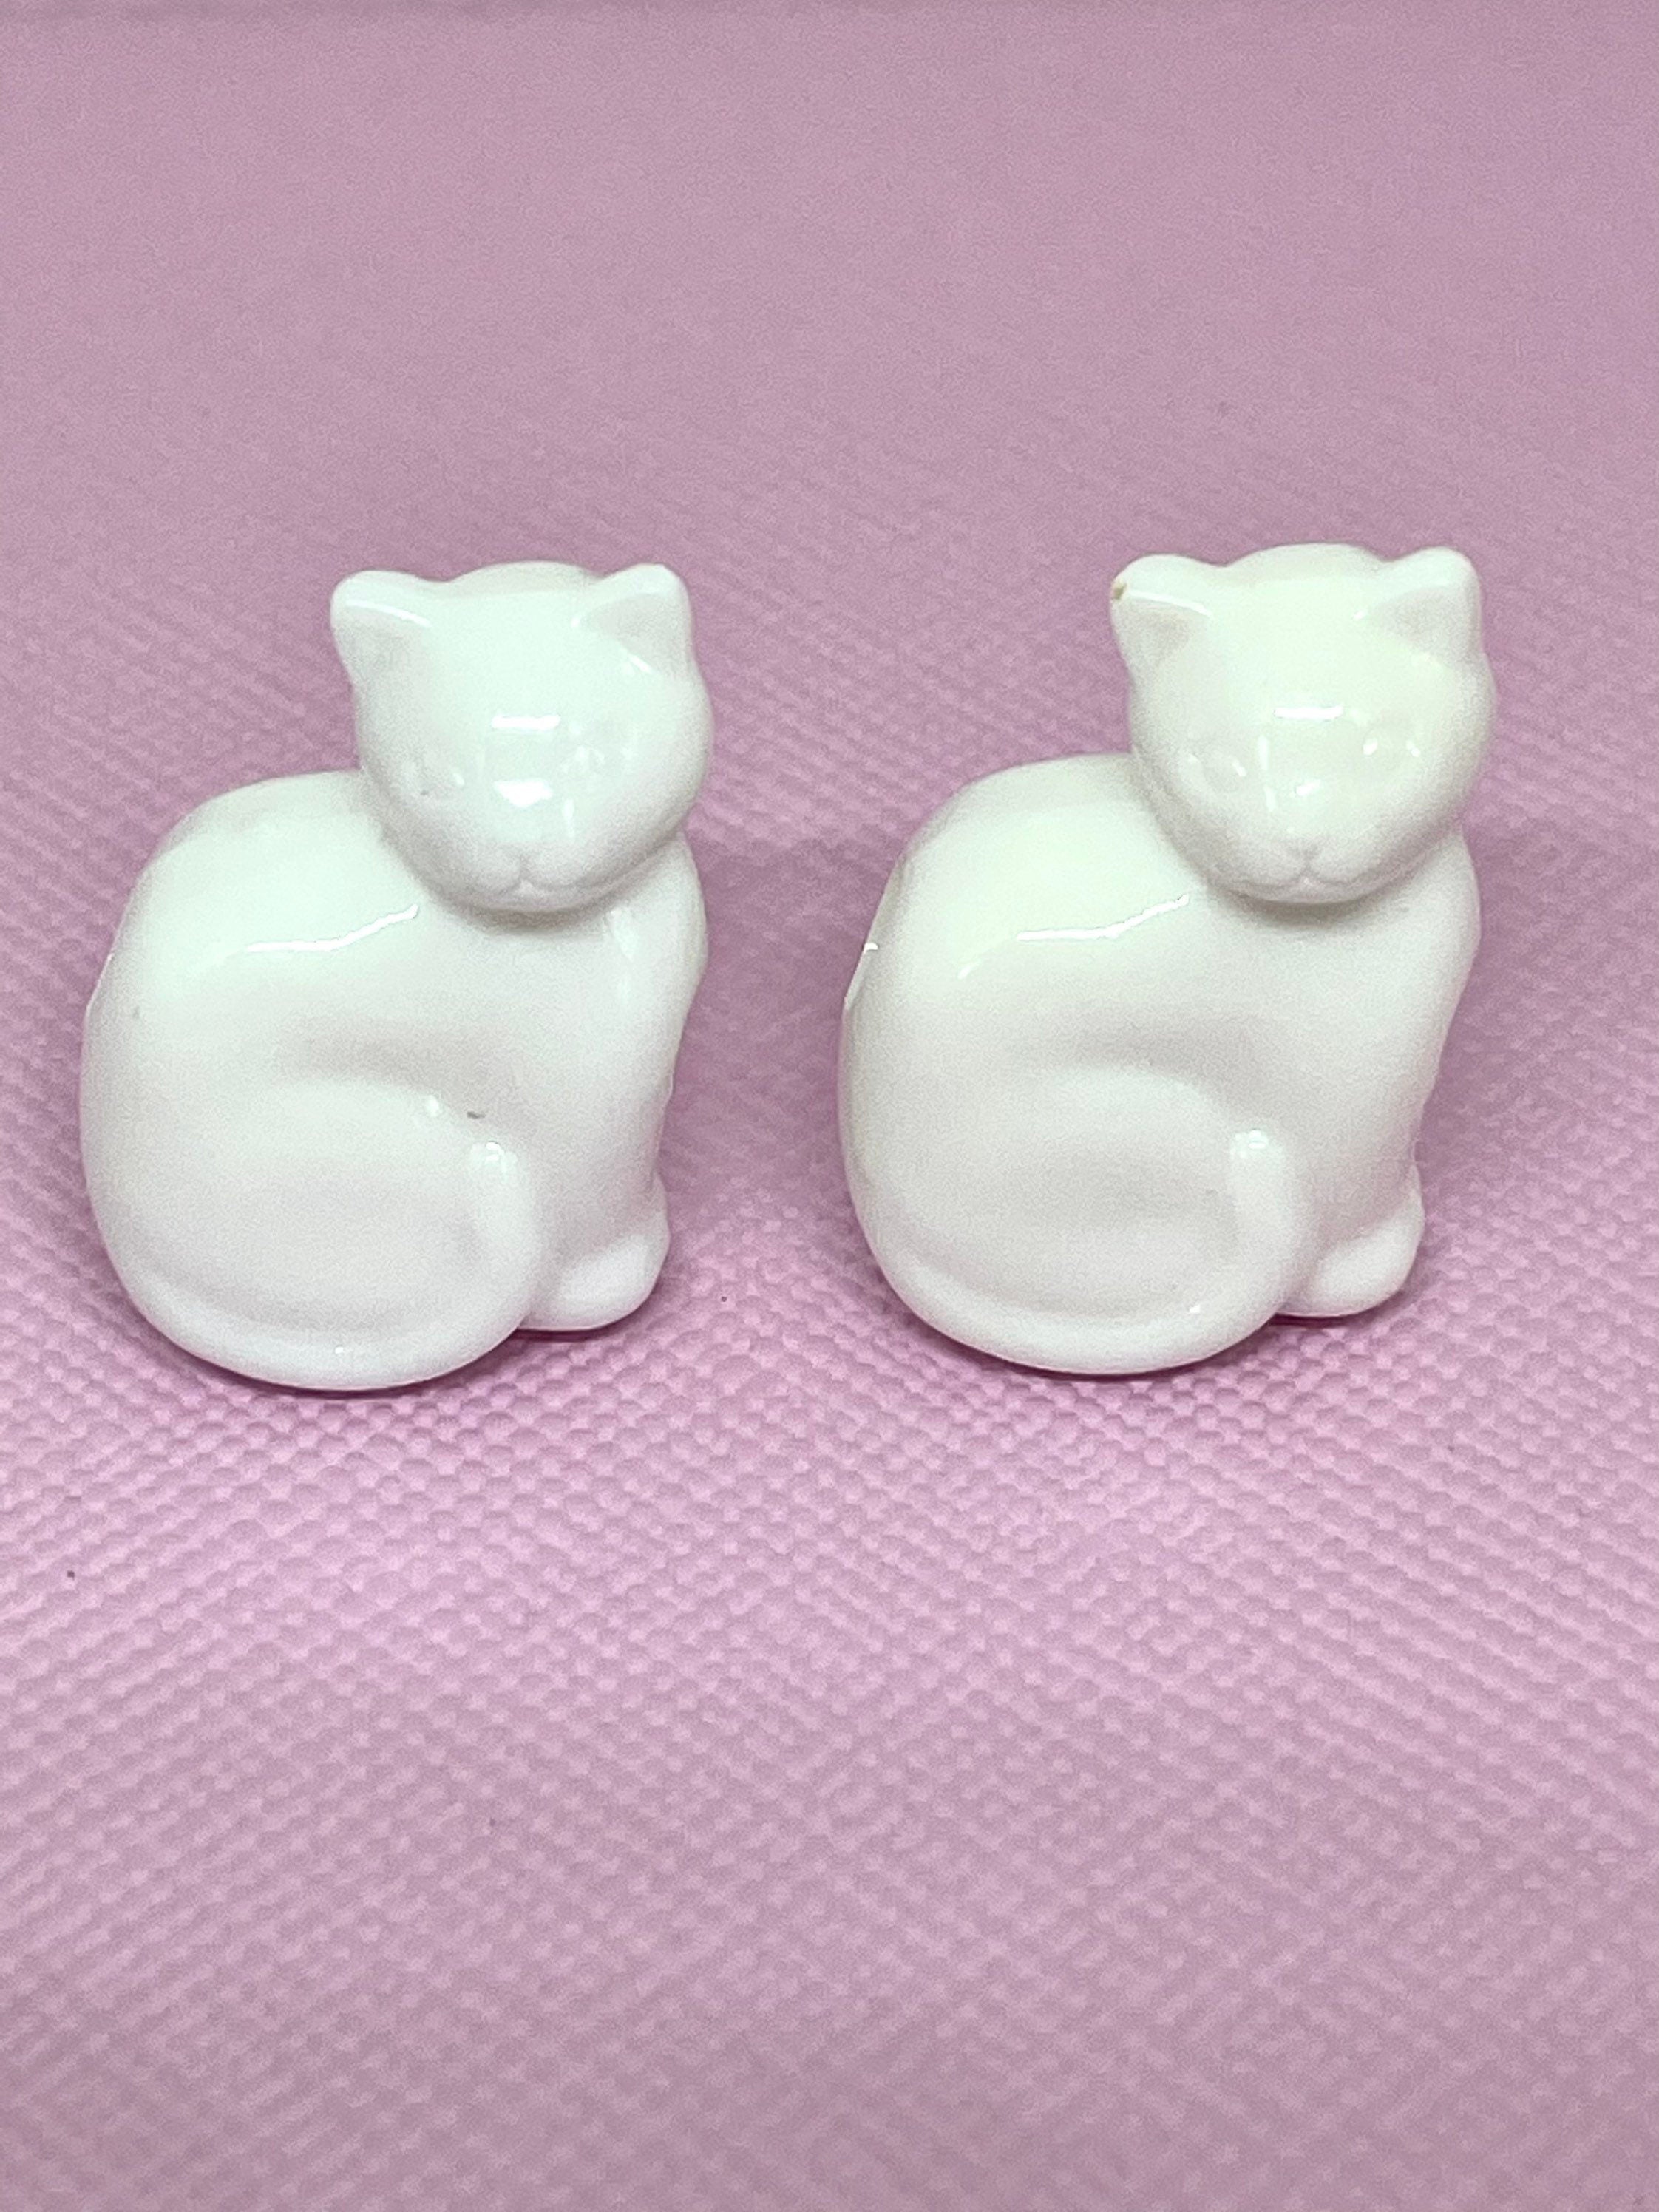 White Cat Beads, White Pet Beads, White Cat Animal Beads for DIY Crafts, White Costume Beads, Pet Lover Beads, Halloween Themed Beads